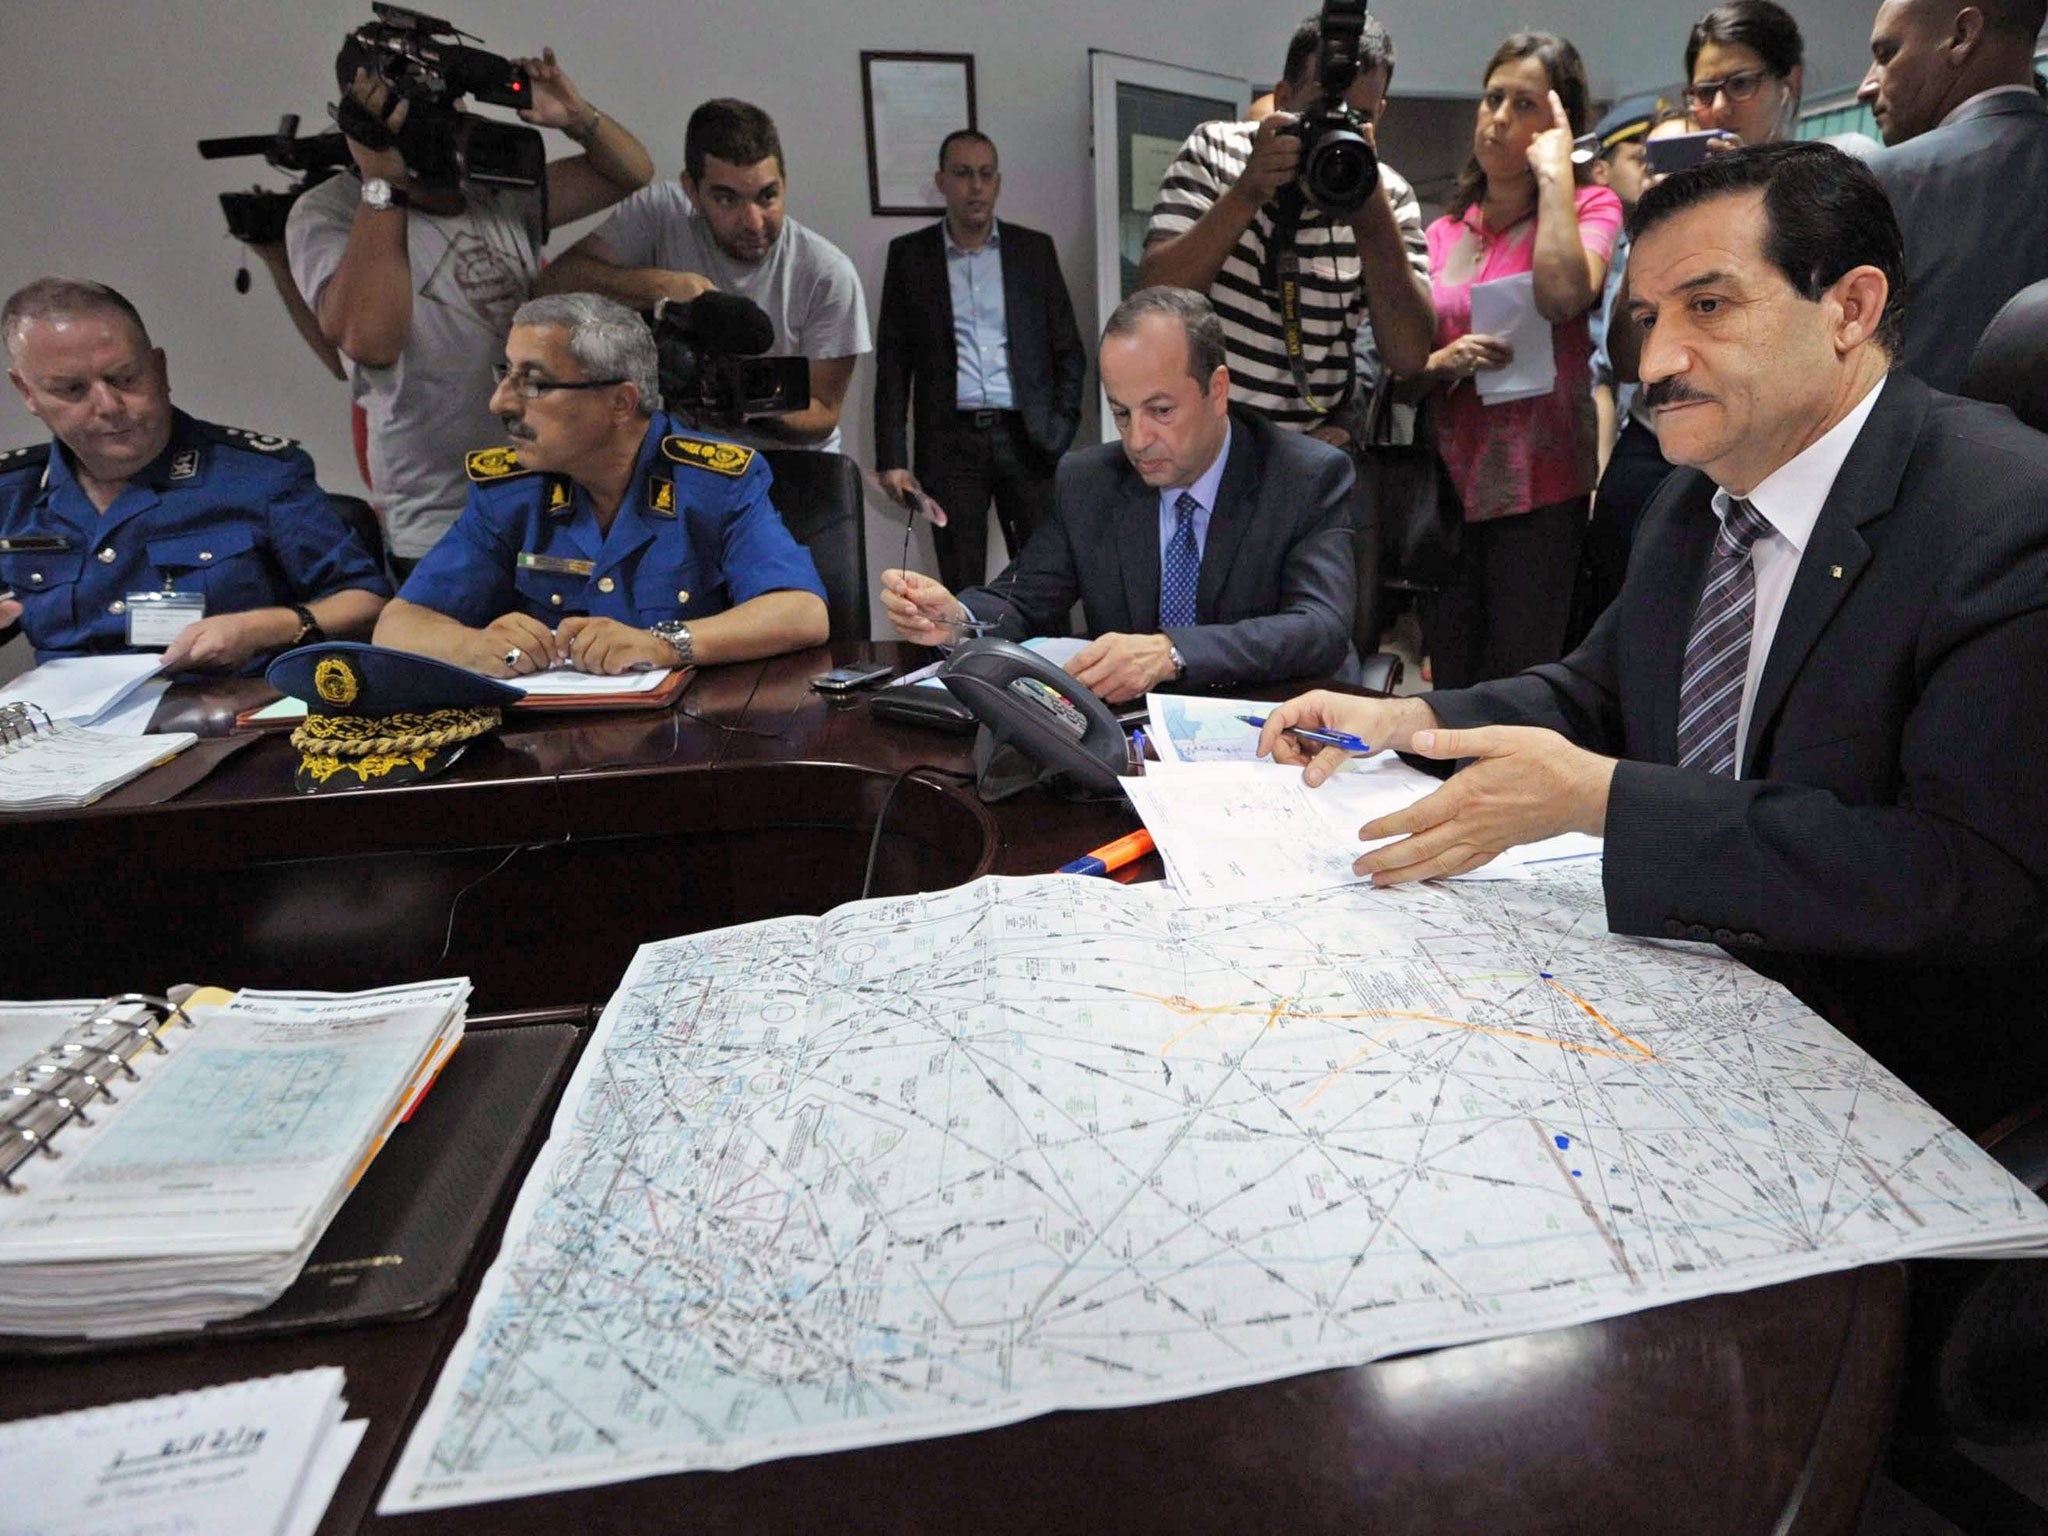 Algerian Minister of Transport Amar Ghoul (R) chairs an Algerian crisis unit meeting at the Houari-Boumediene International Airport in Algiers, Algeria, 24 July 2014